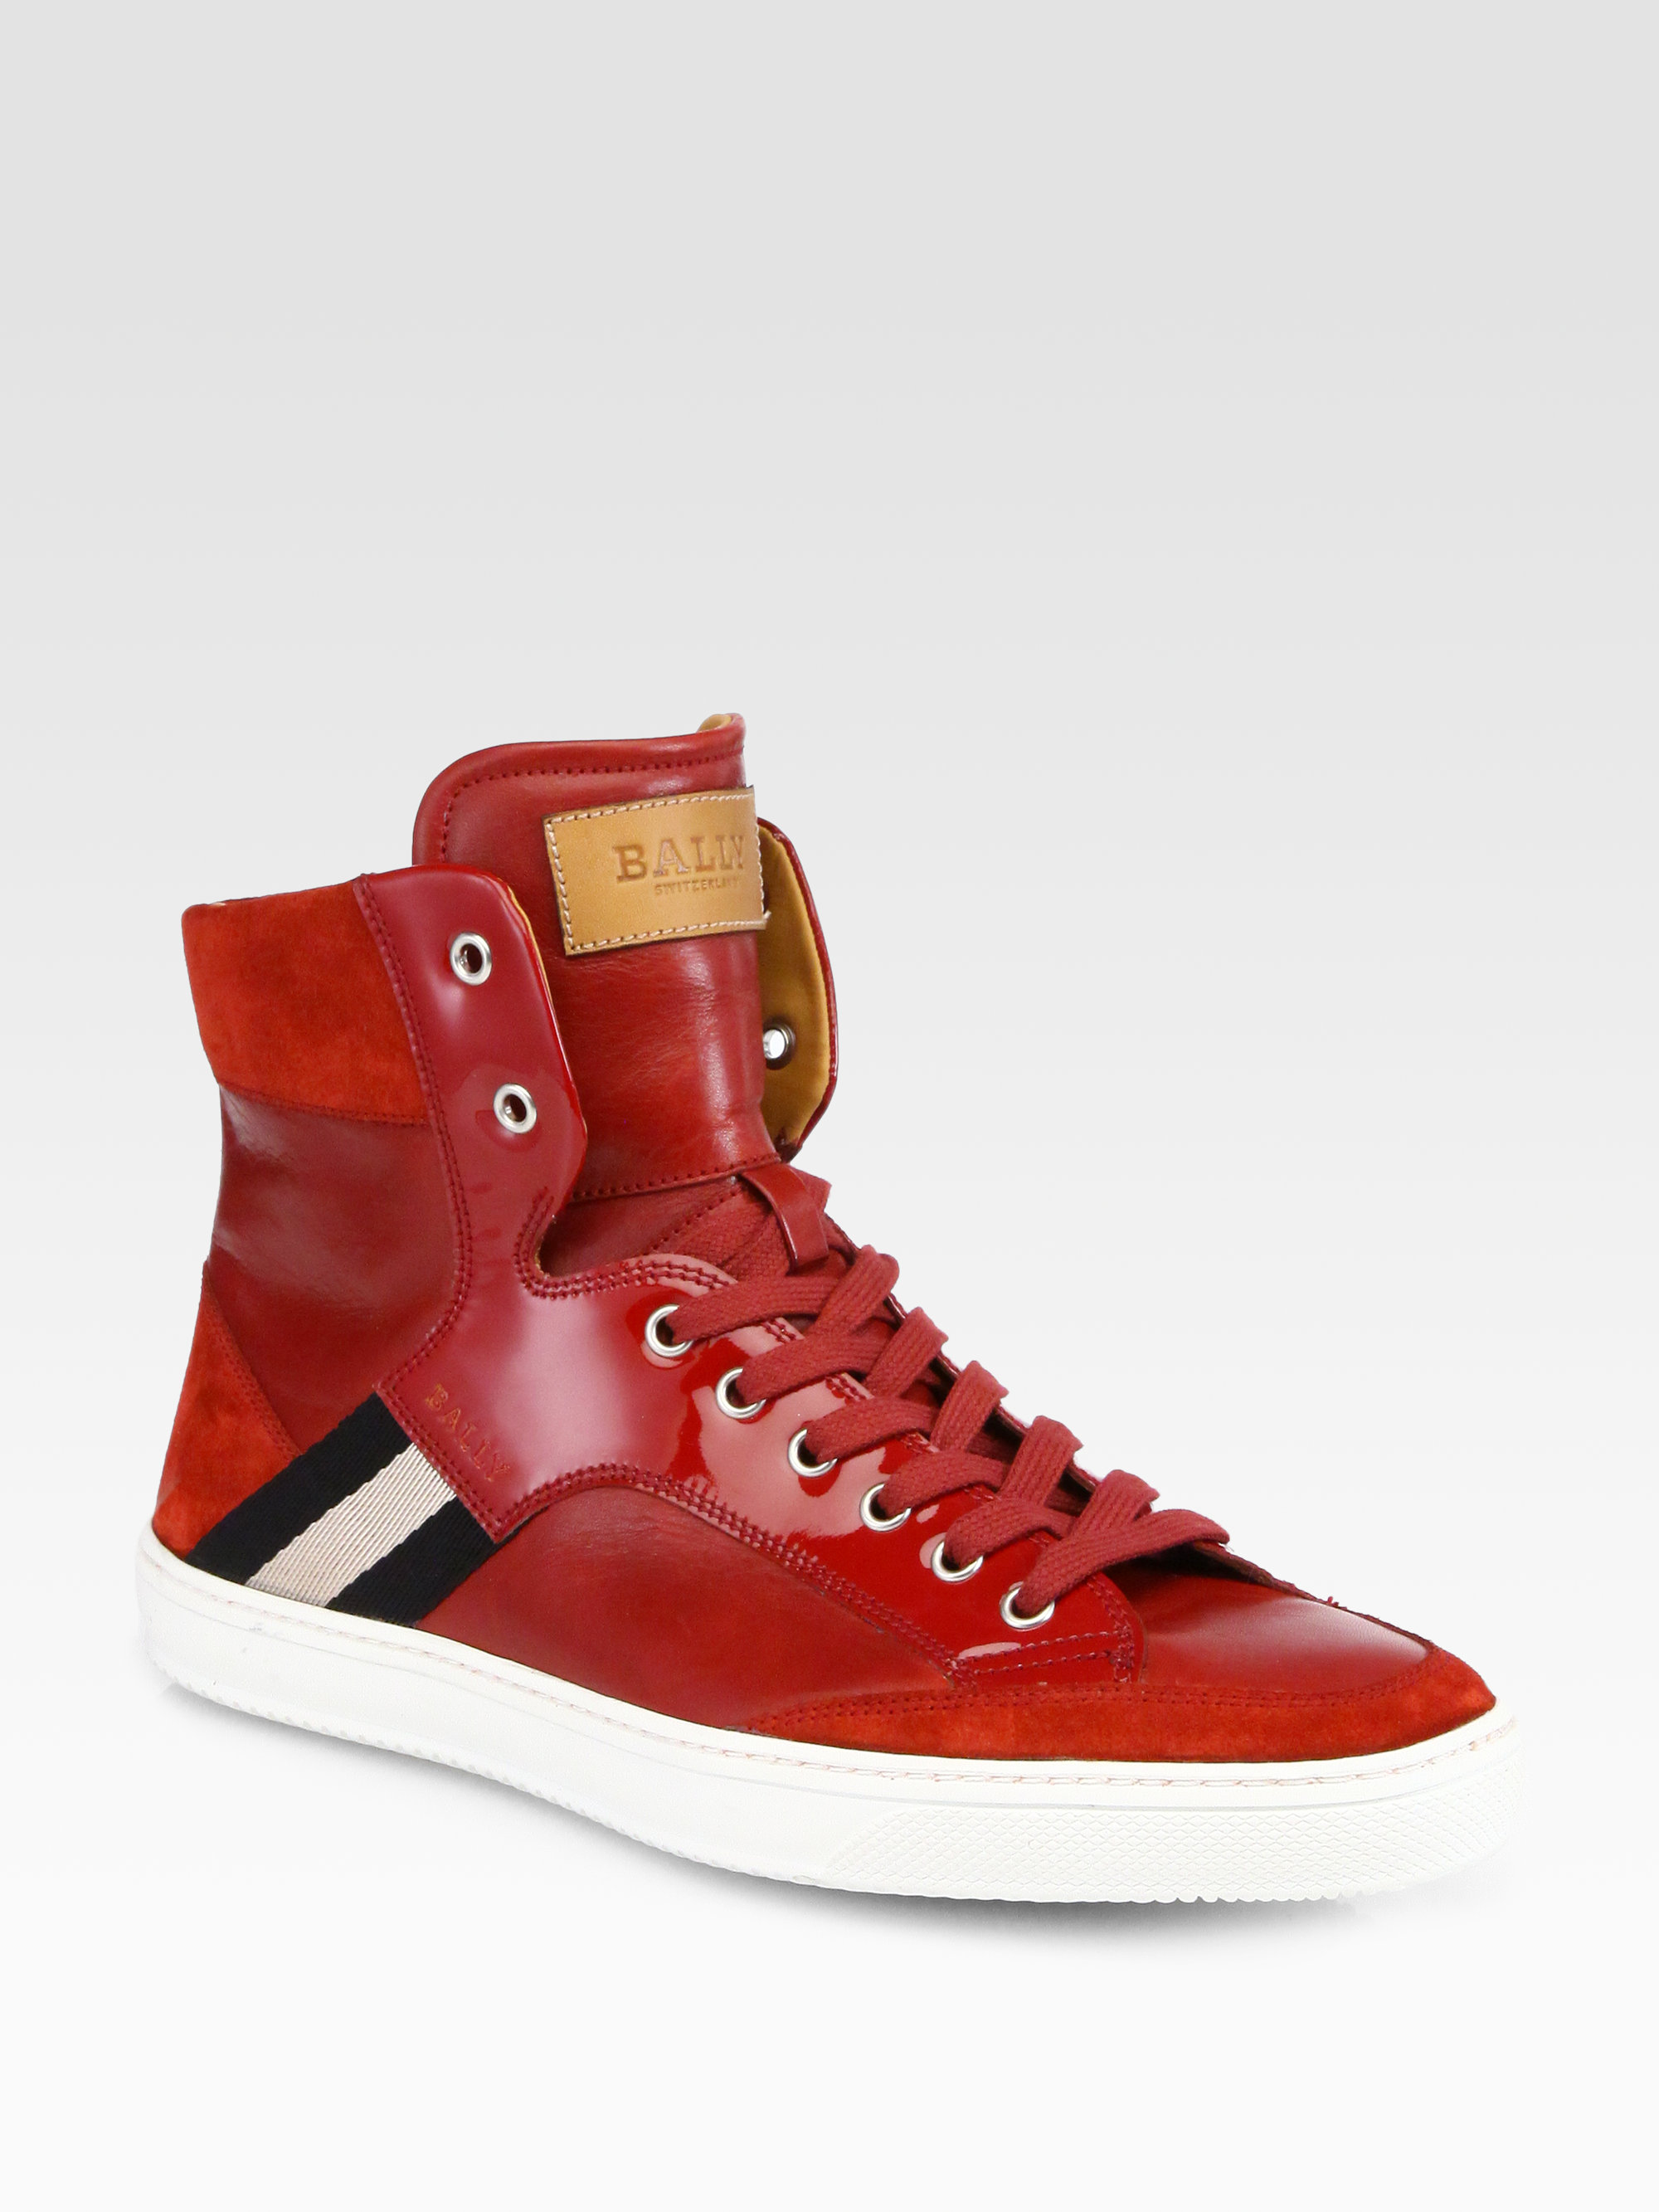 Lyst - Bally Oldani-148 High-Top Sneakers in Red for Men